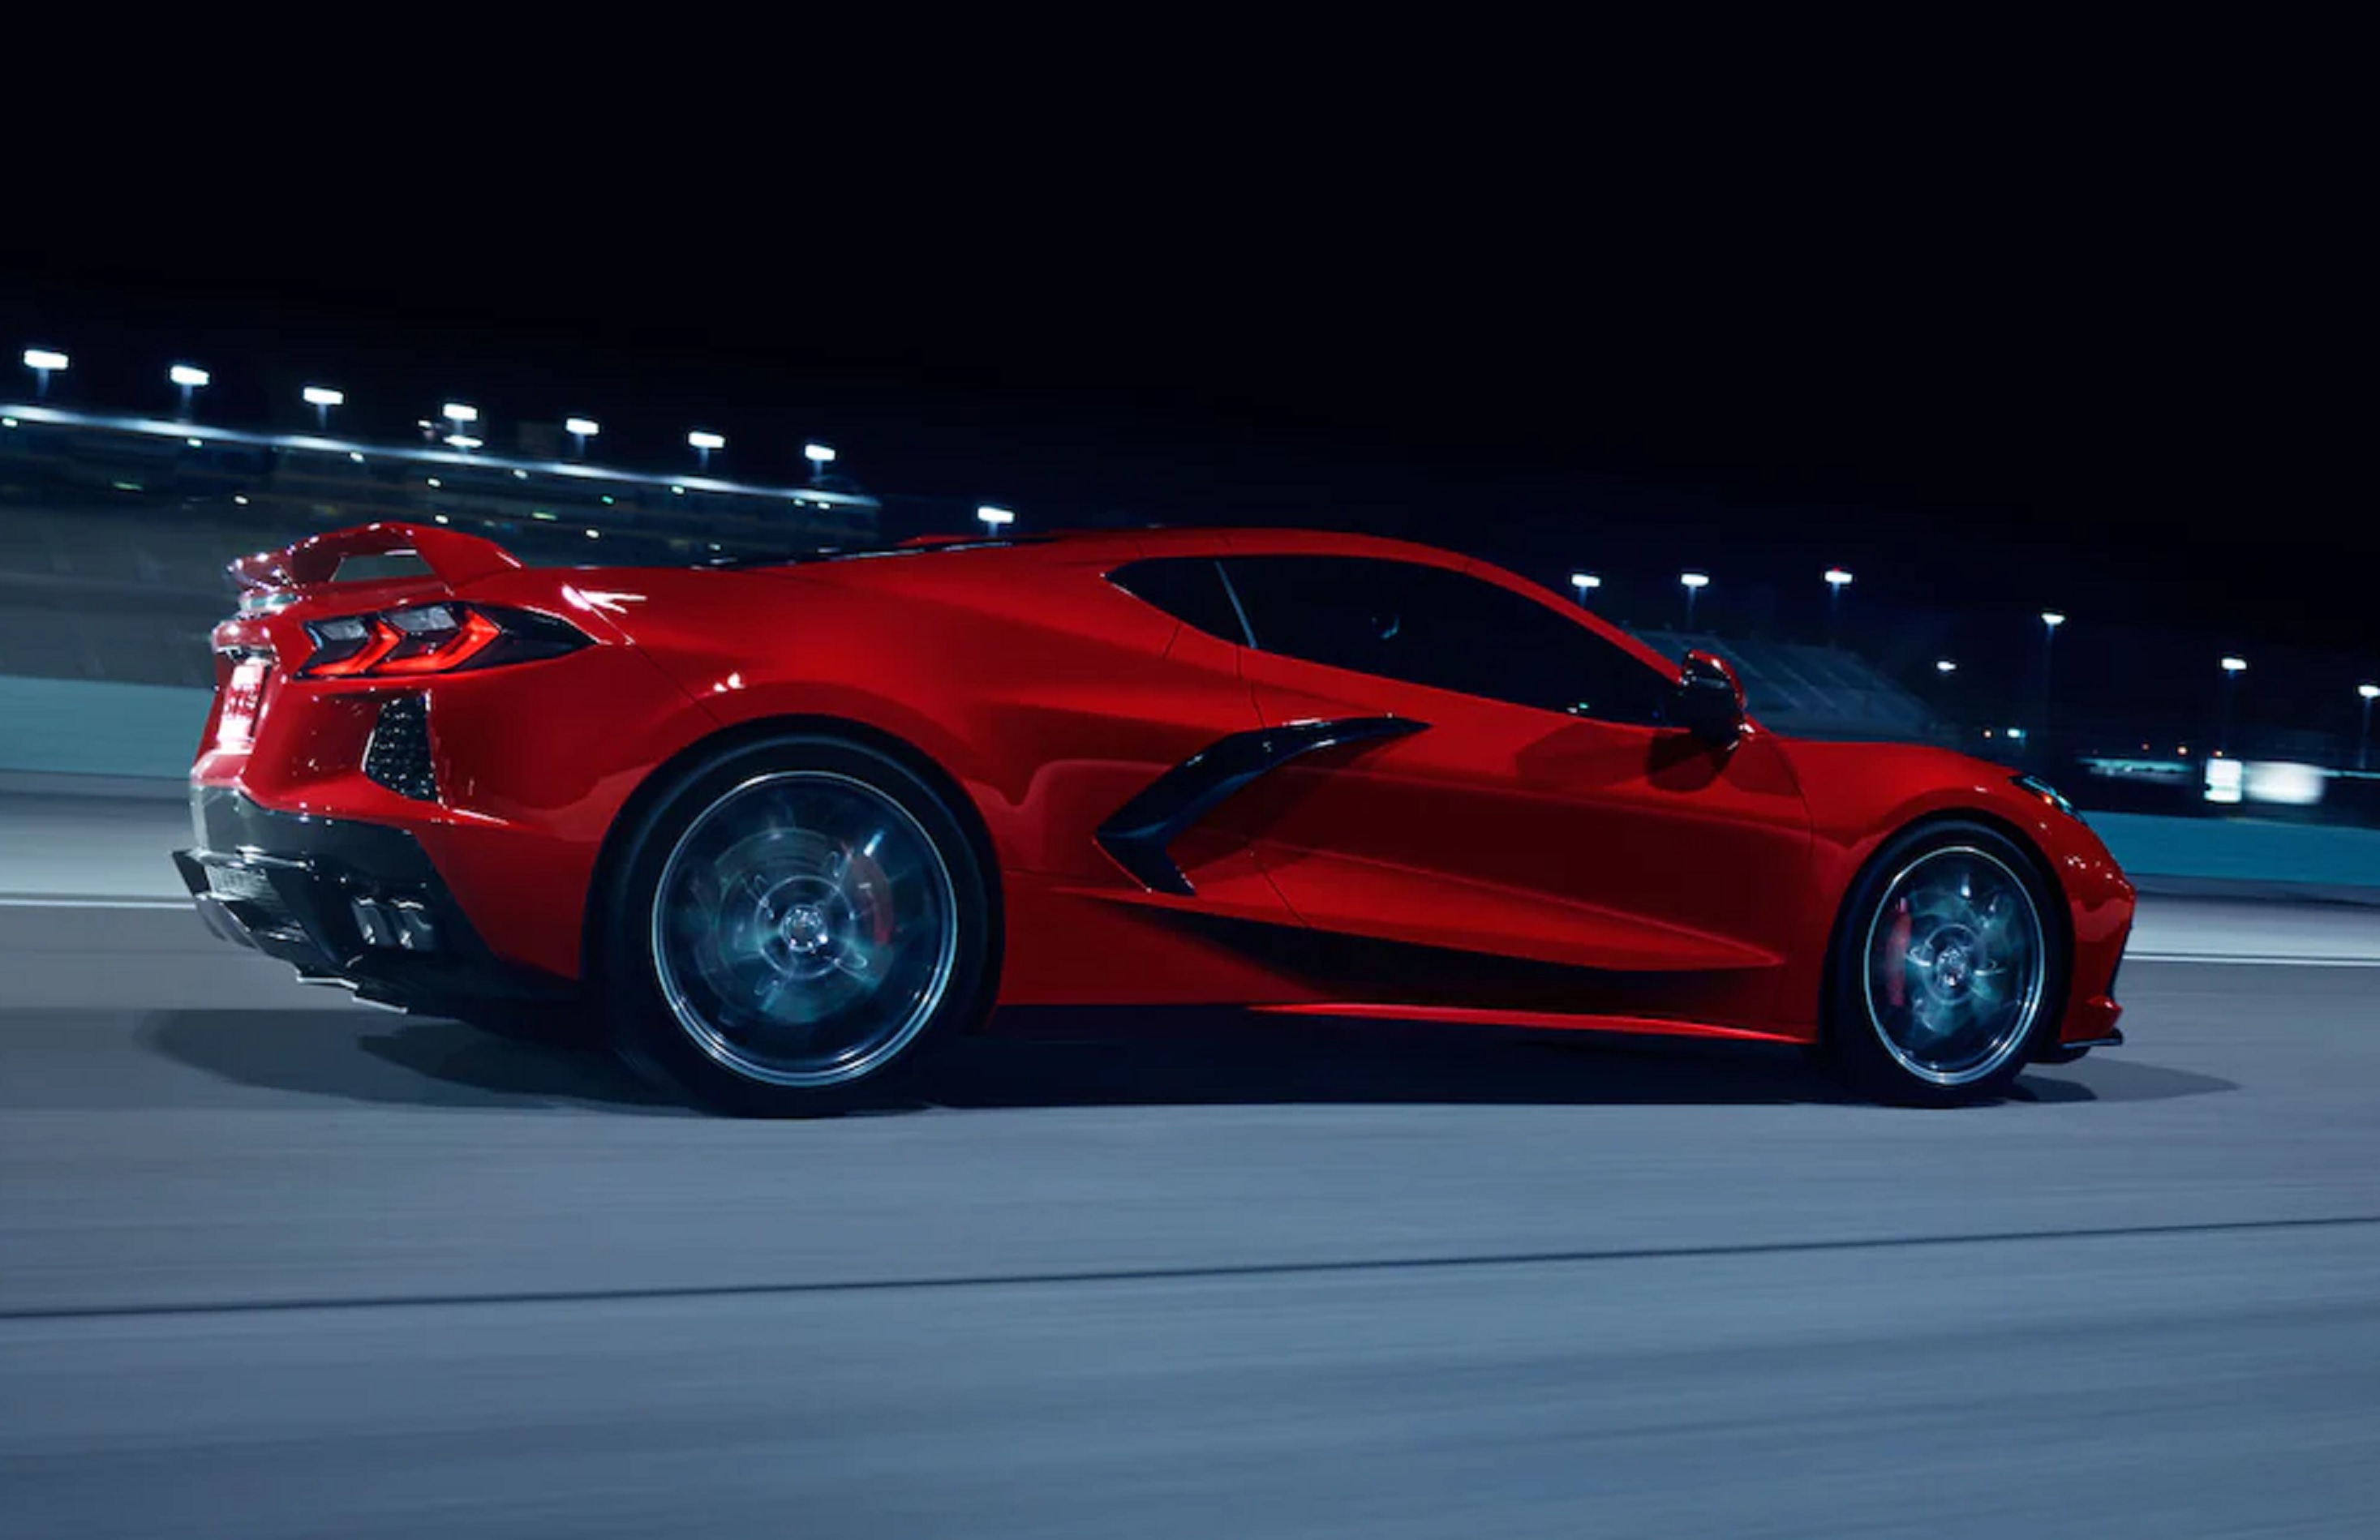 The rear 3/4 view of a red 2022 Chevrolet C8 Corvette 3LT Coupe Z51 driving on a racetrack at night